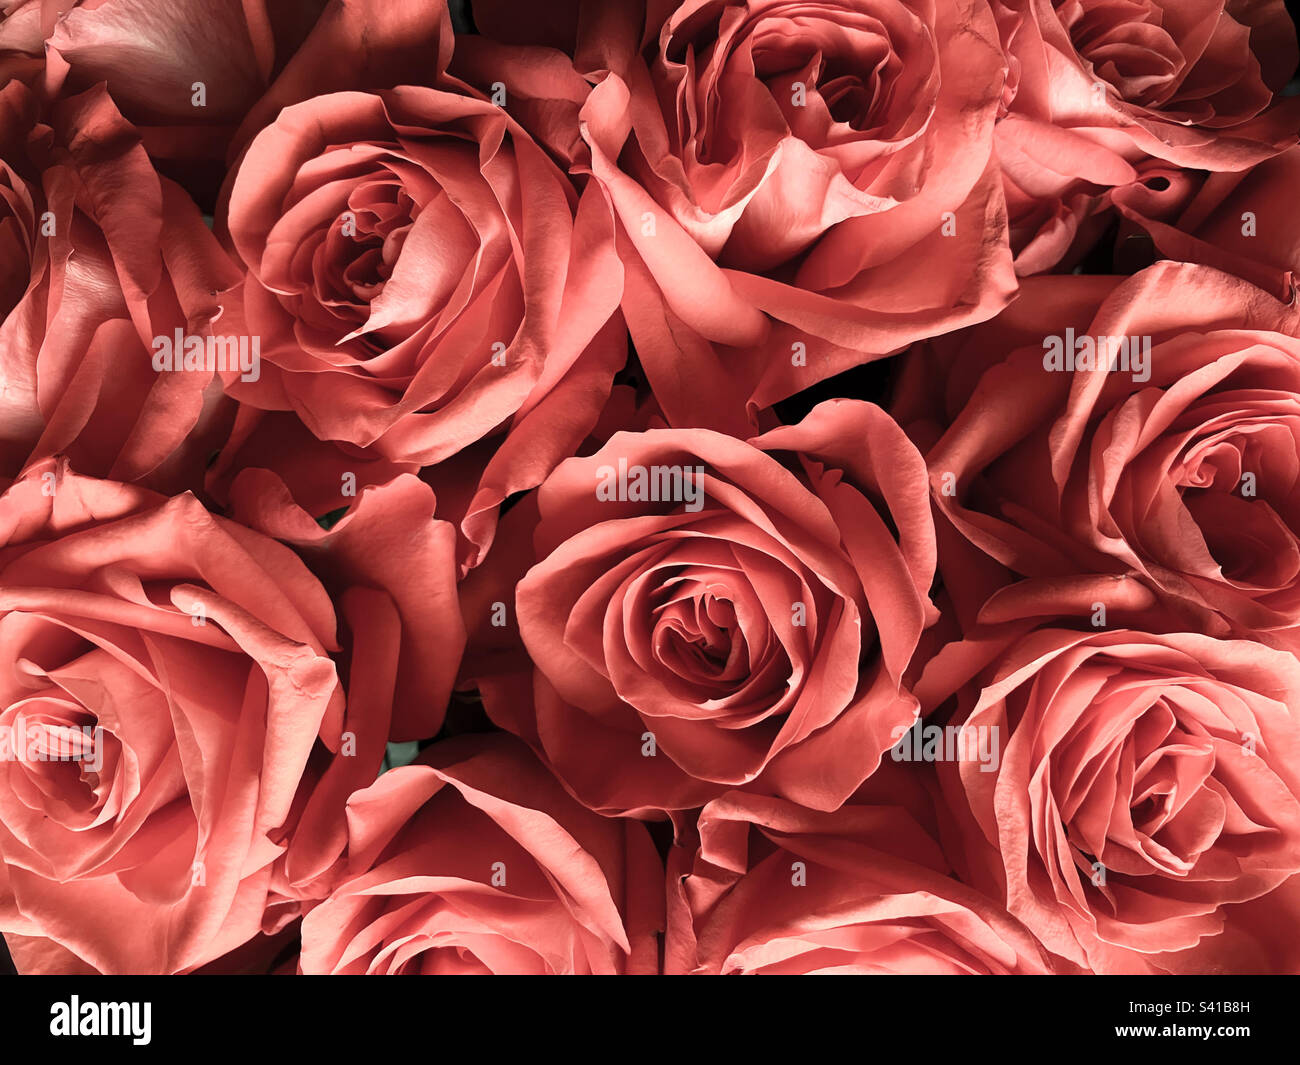 Bouquet of beautiful dusky pink roses, detail Stock Photo